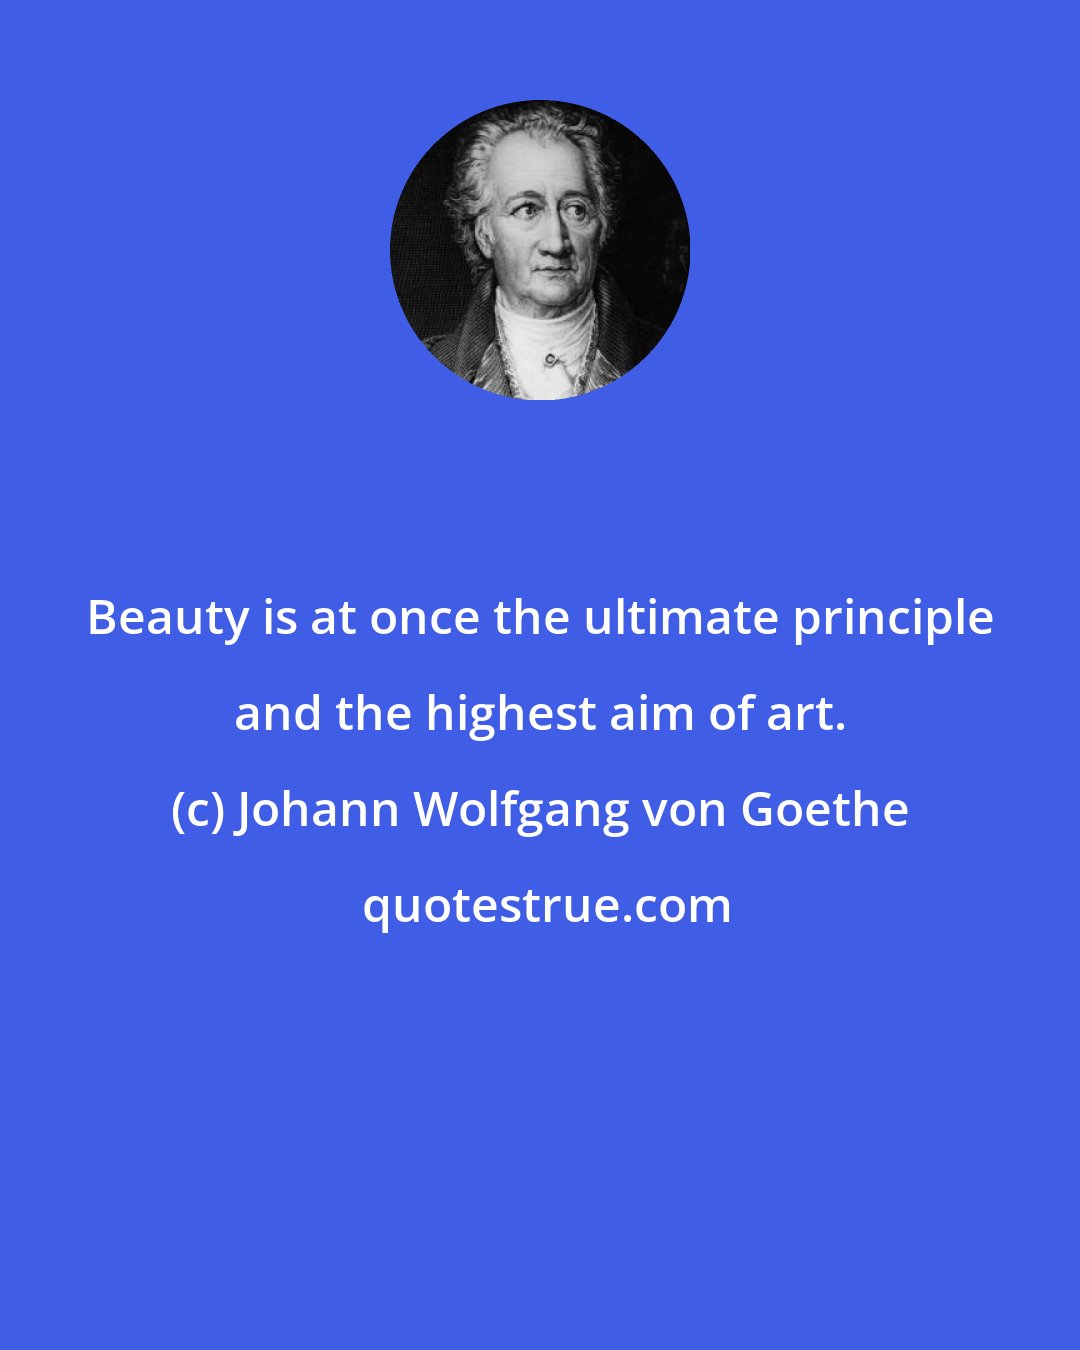 Johann Wolfgang von Goethe: Beauty is at once the ultimate principle and the highest aim of art.